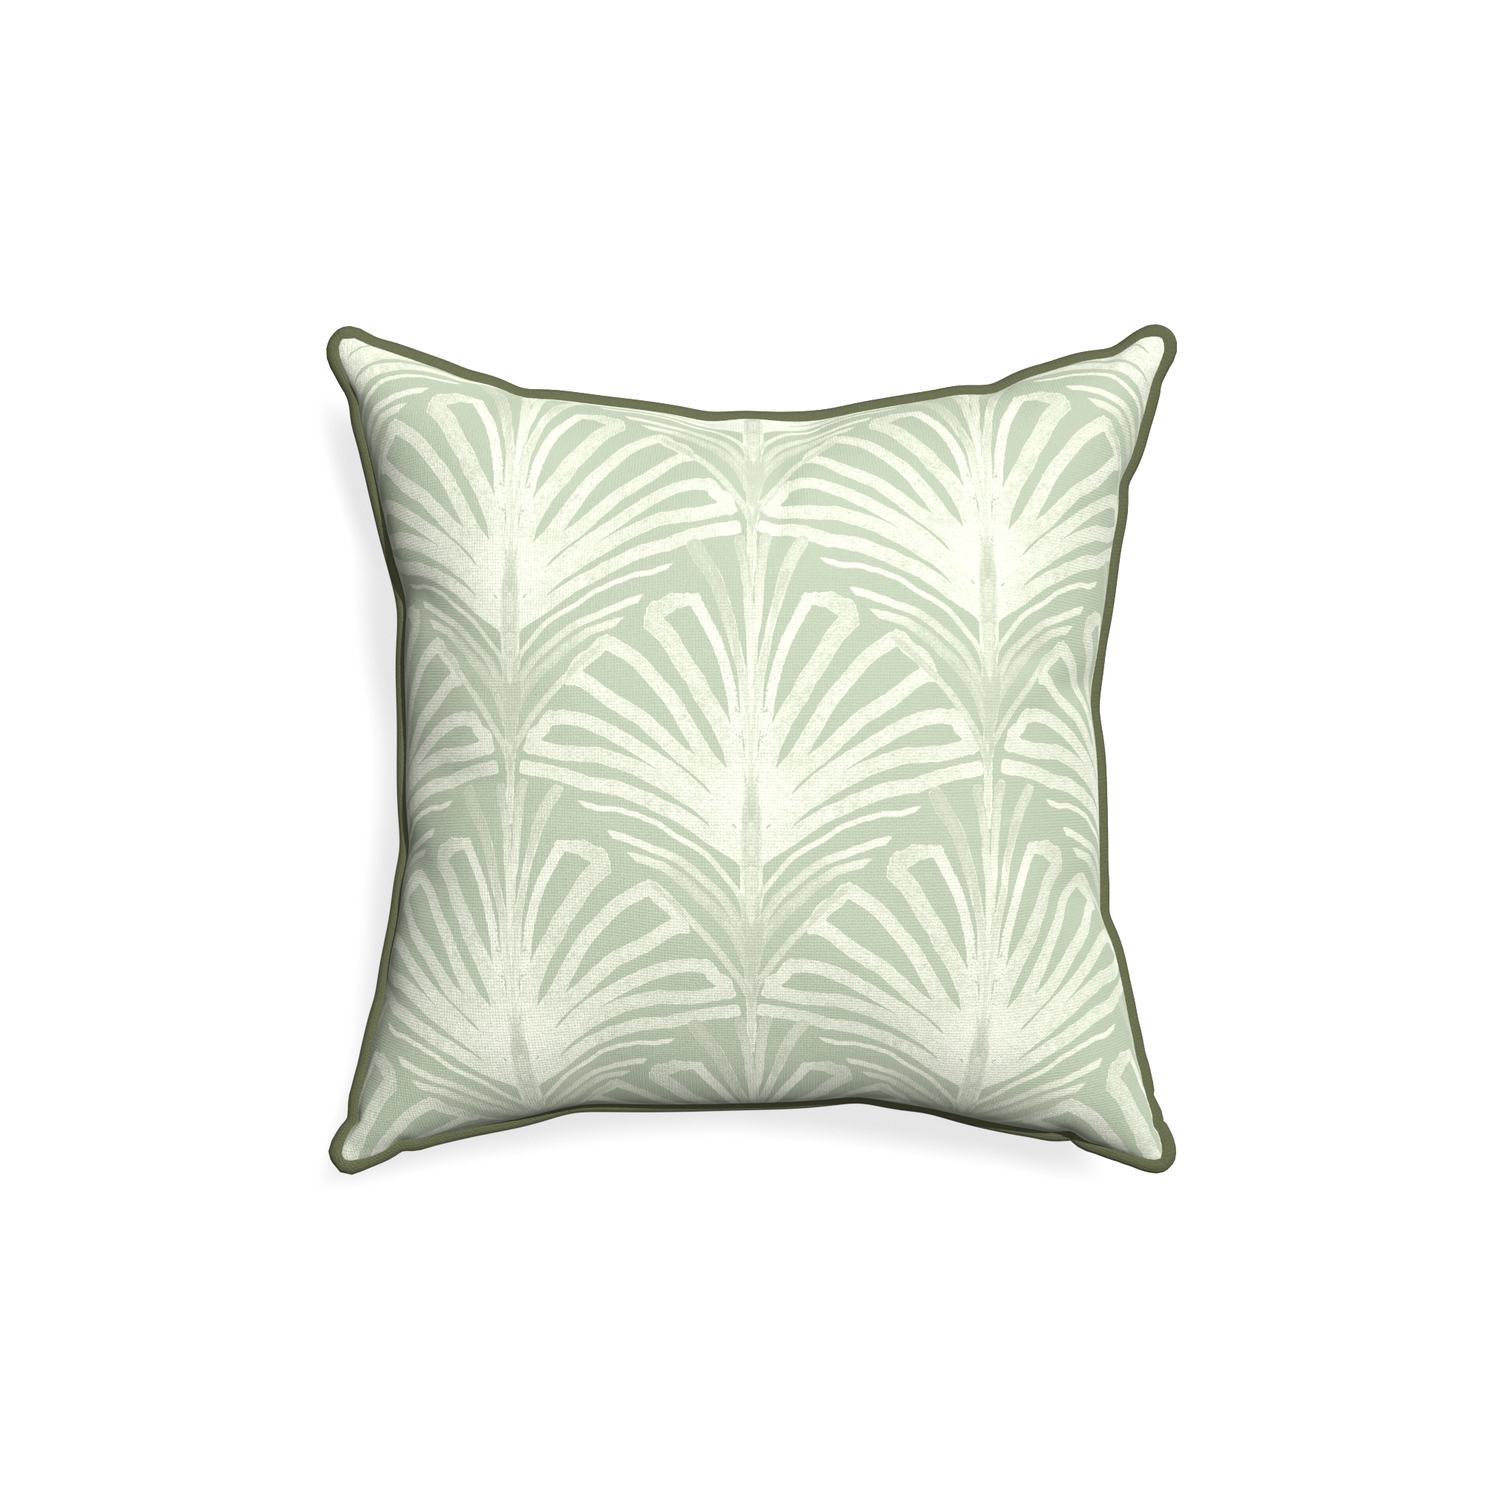 18-square suzy sage custom sage green palmpillow with f piping on white background